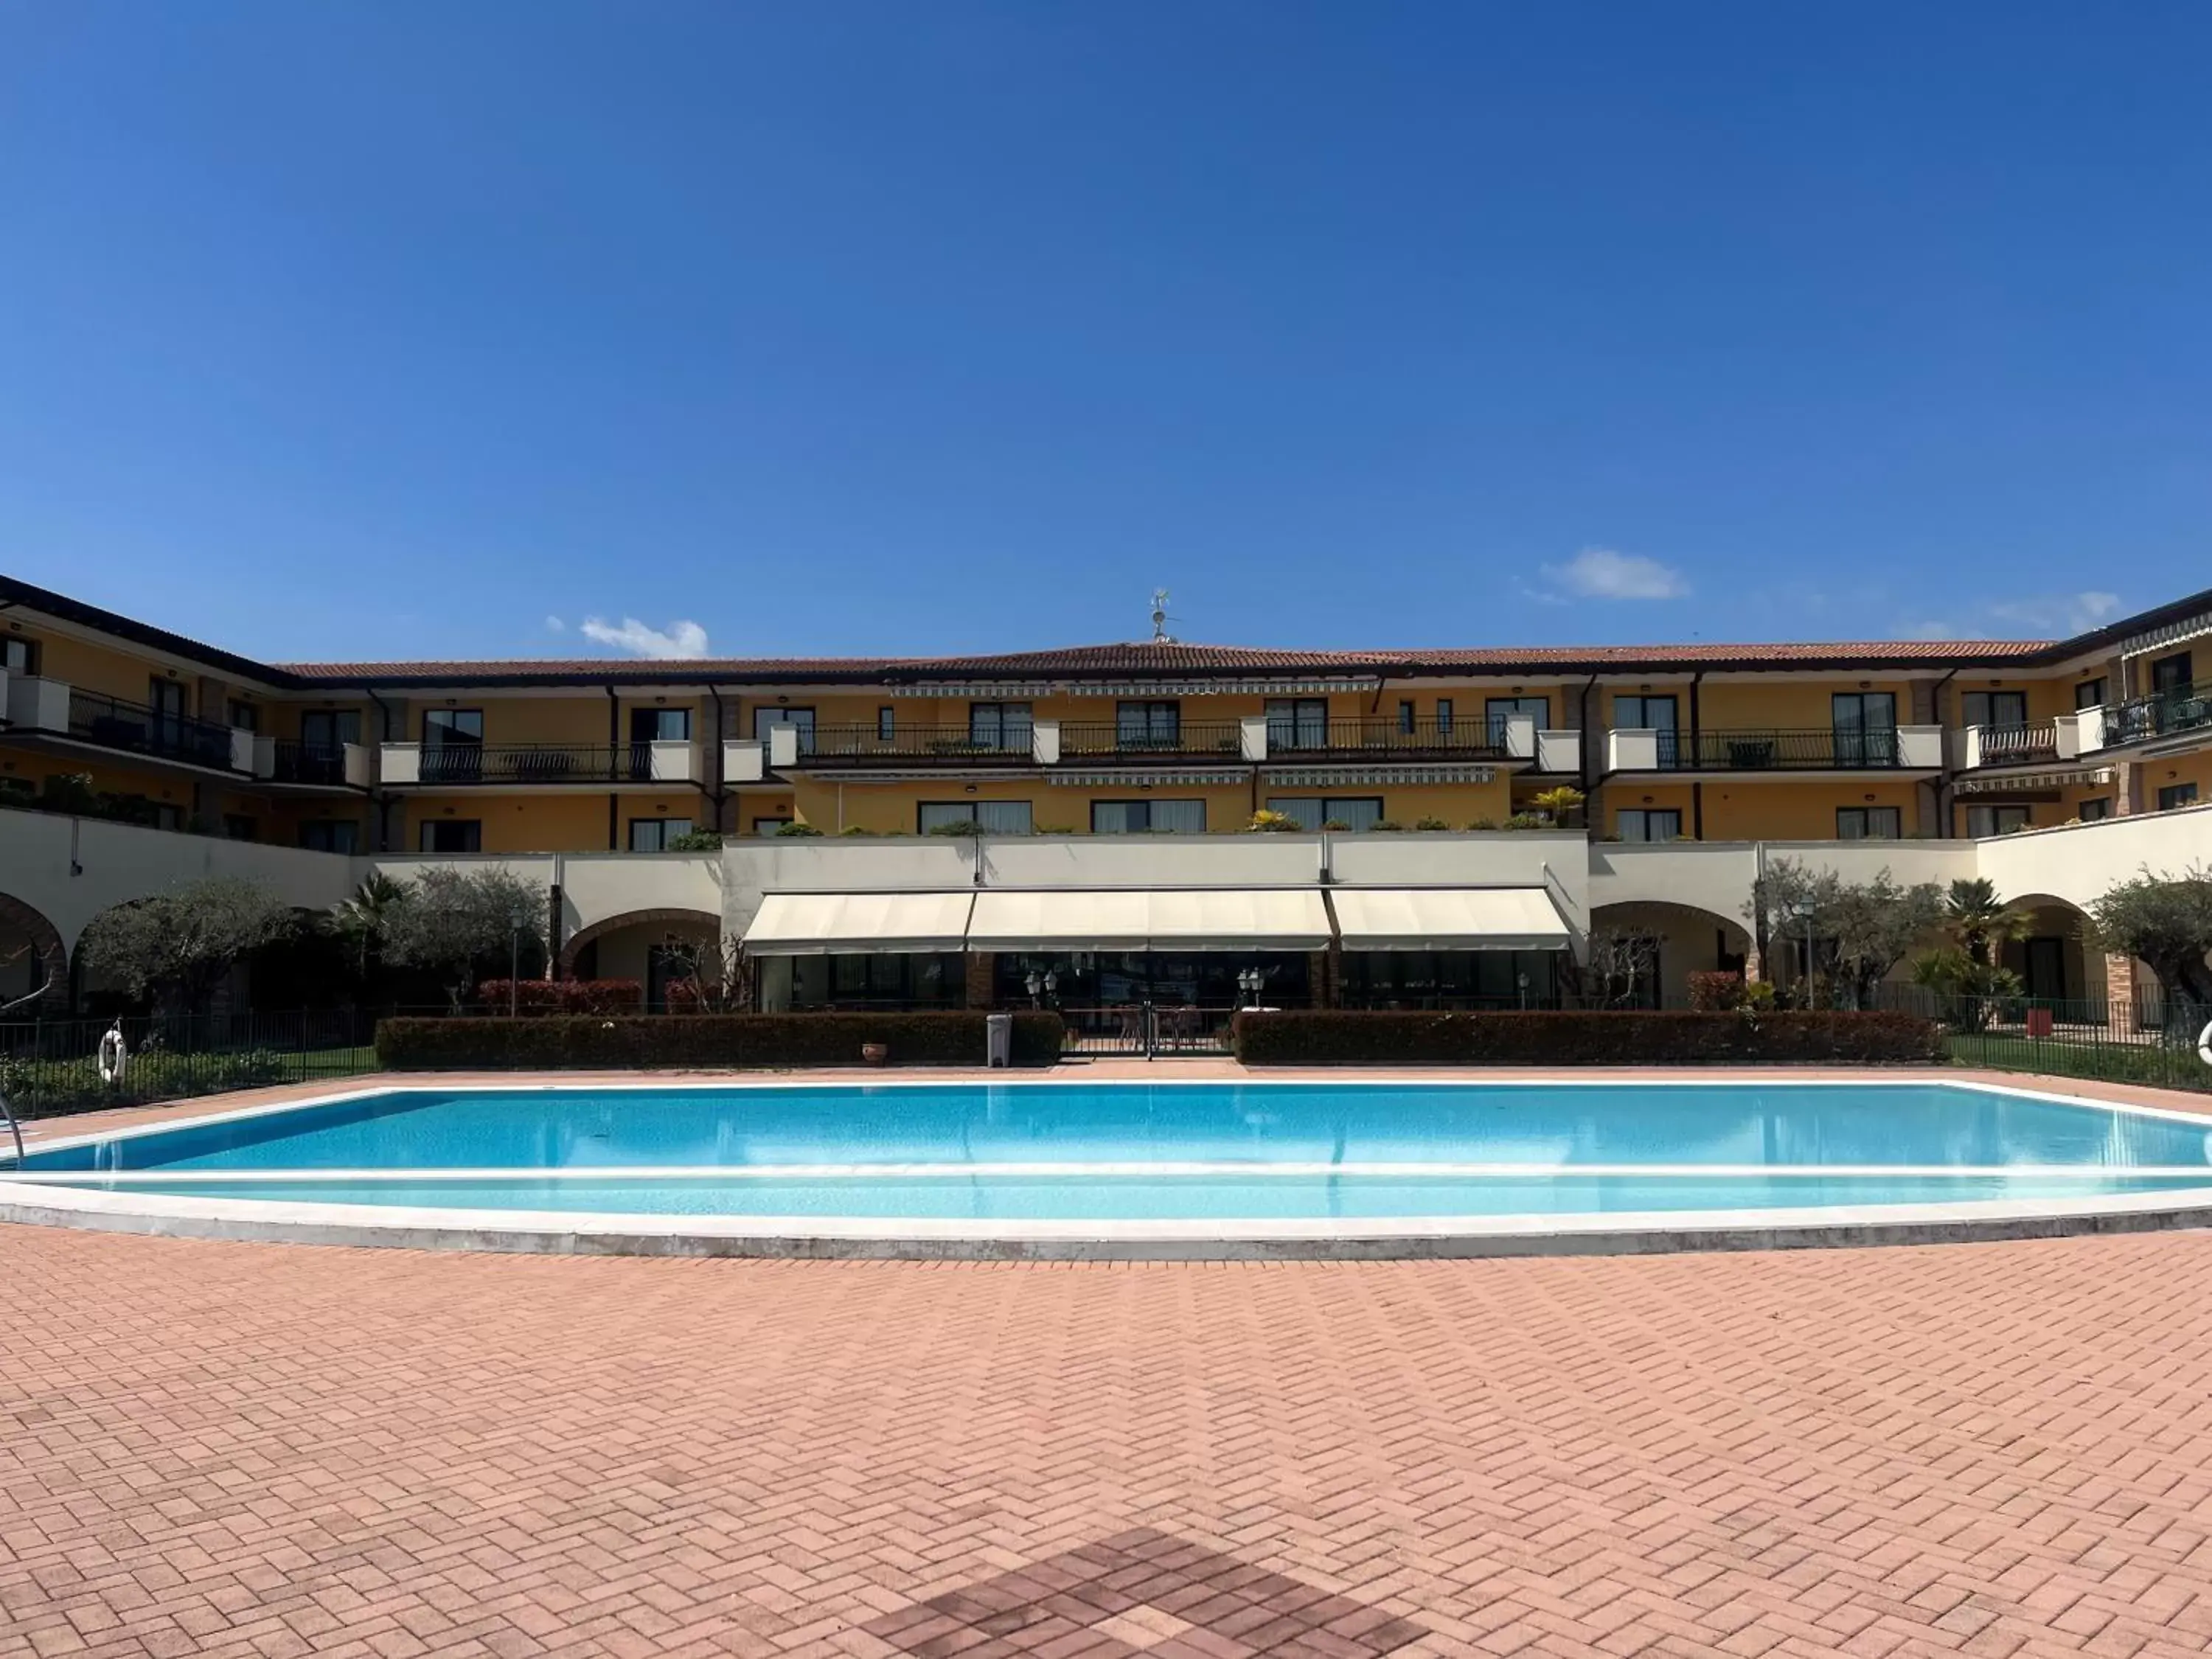 Property building, Swimming Pool in Le Terrazze sul Lago Hotel & Residence